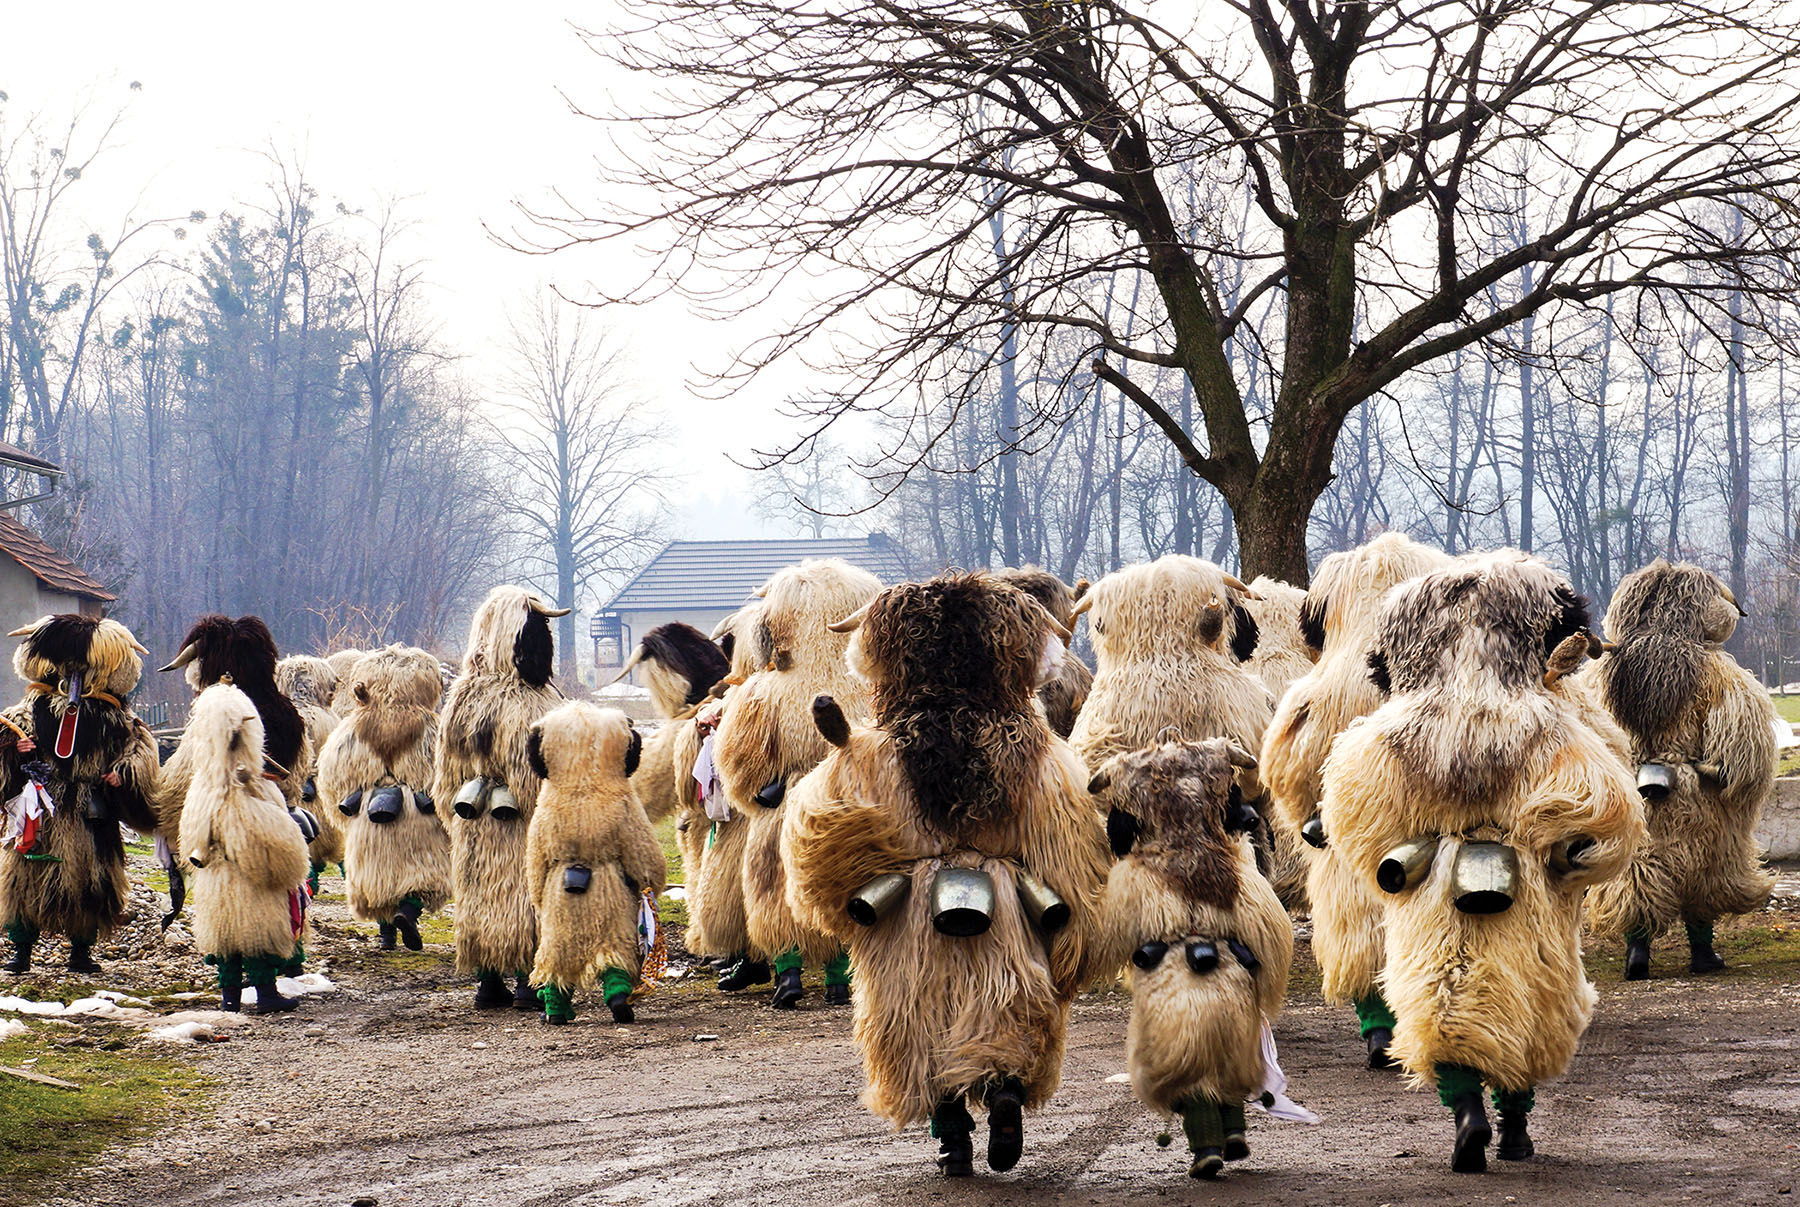 Slovenian villagers dress as Kurents to scare away winter; these days, tourists can buy off-the-rack Kurent costumes and join the parade.